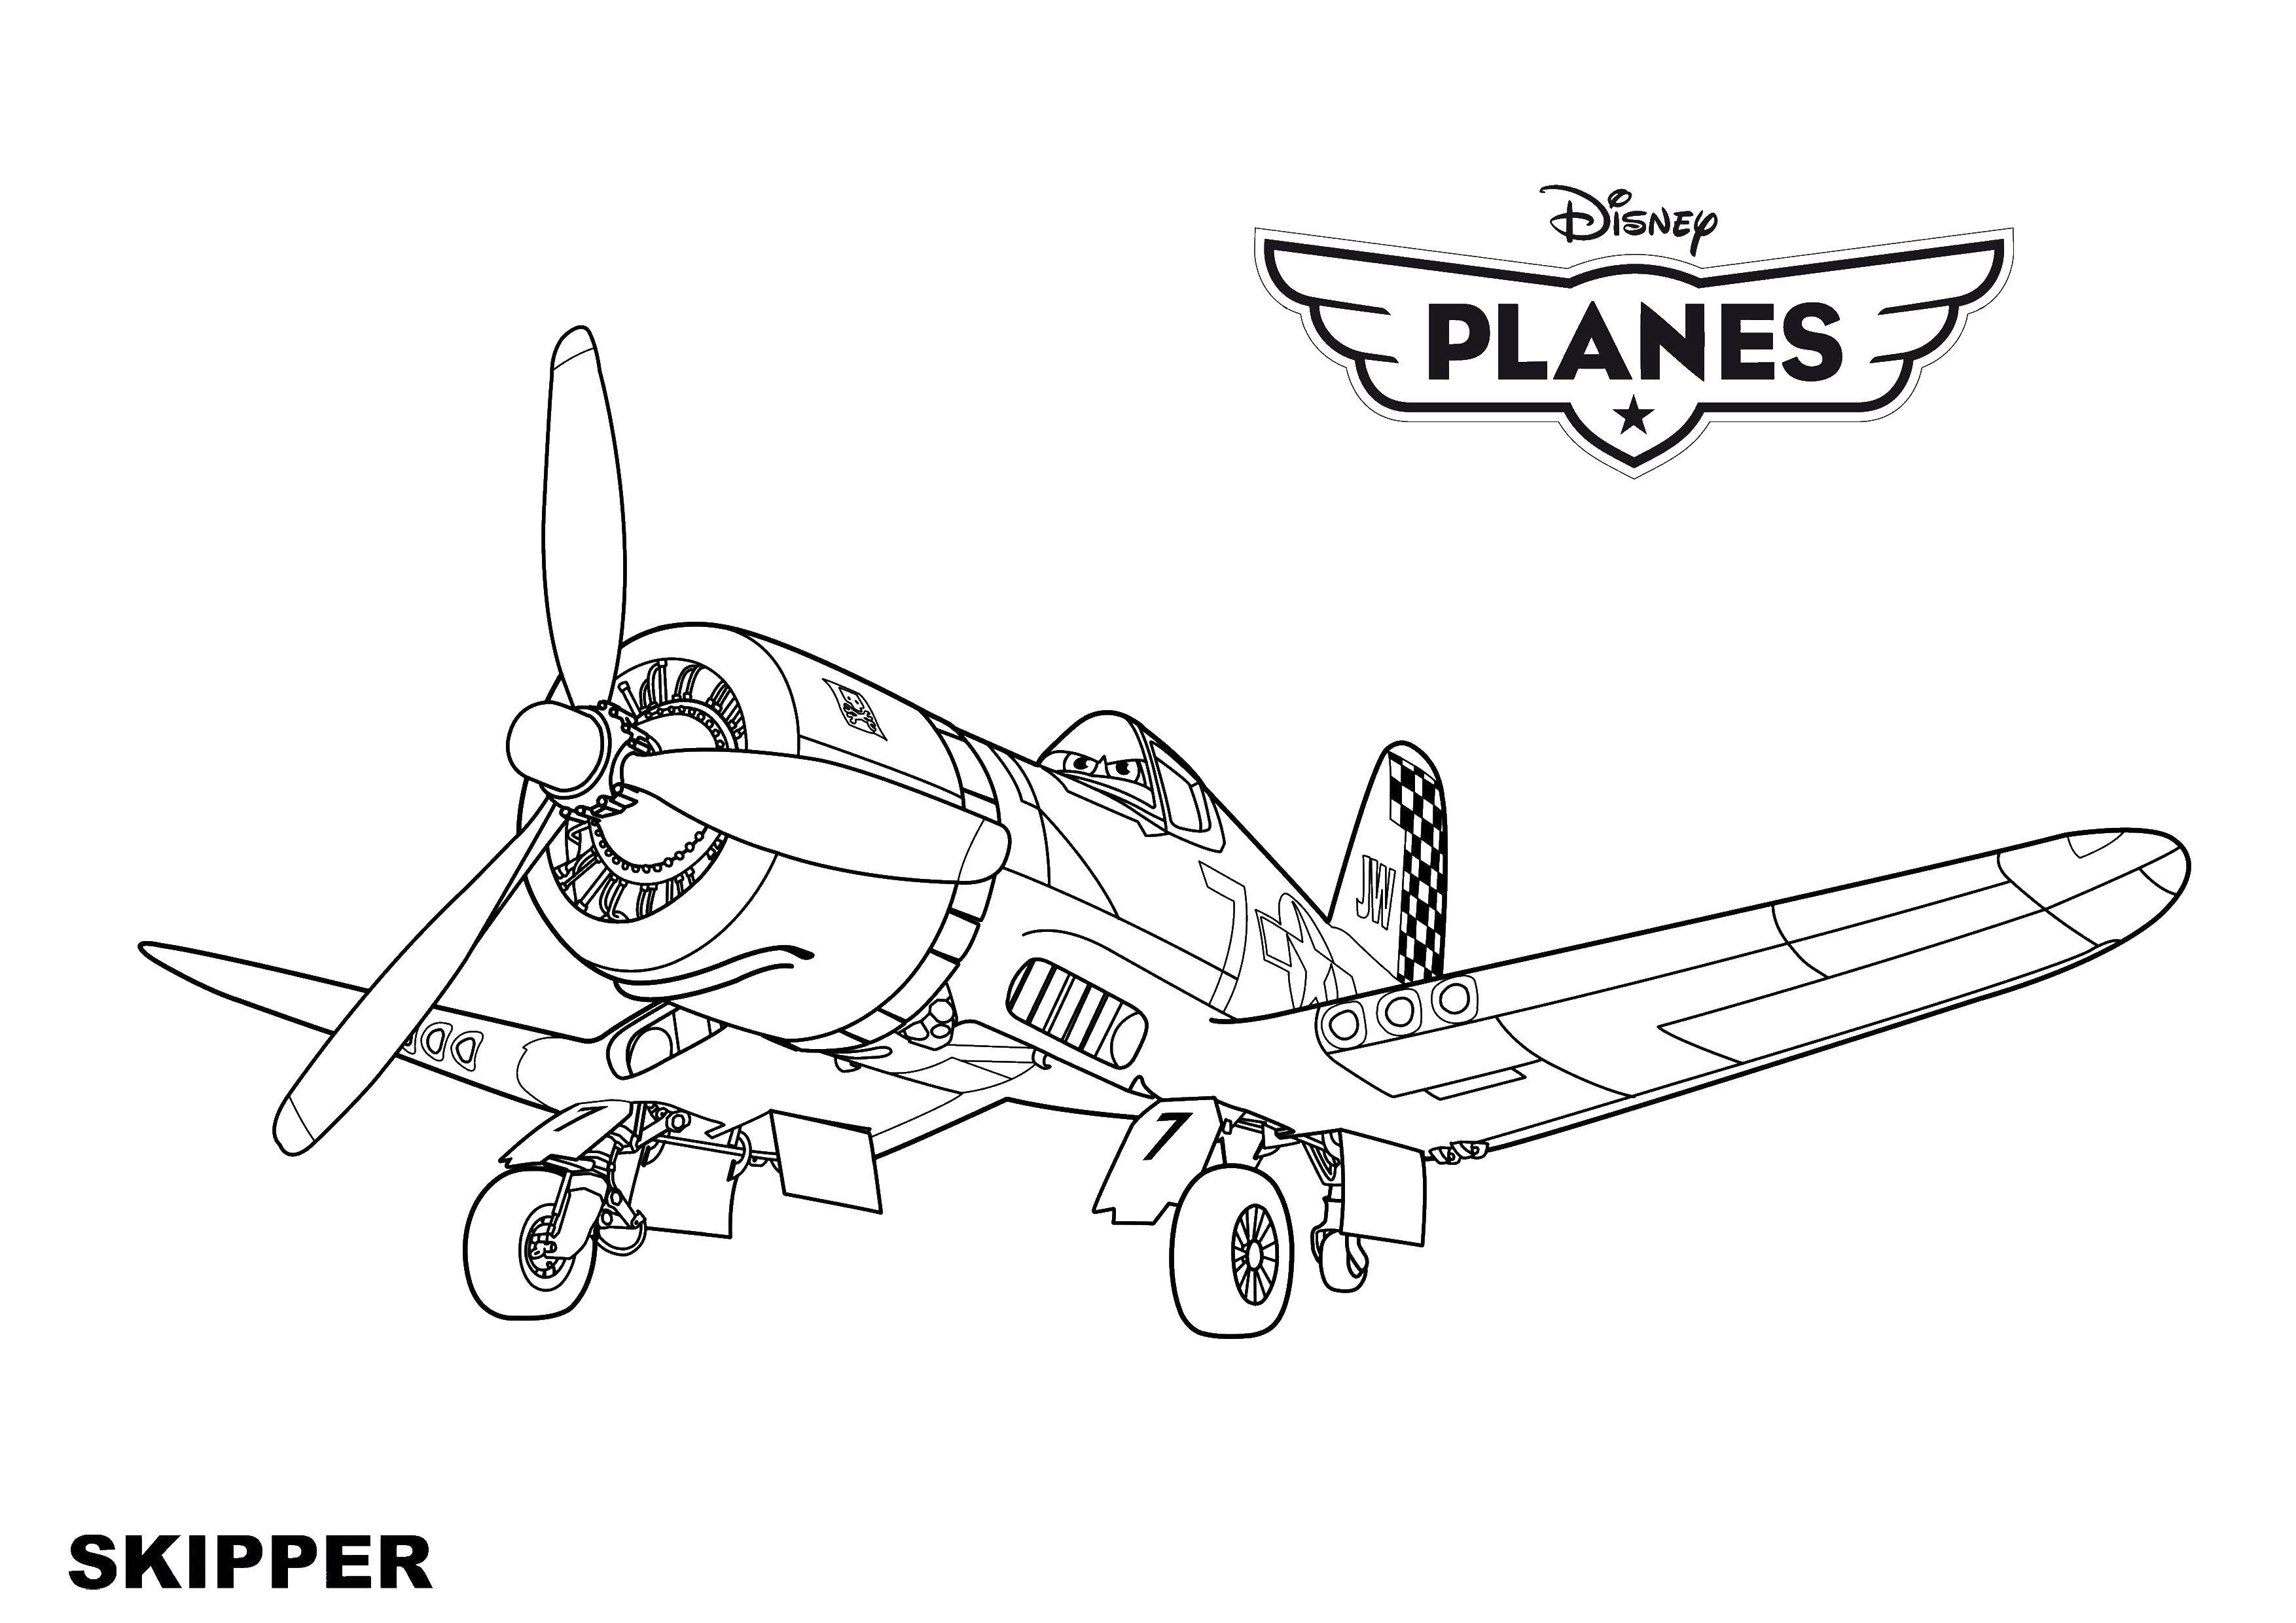 Coloring The plane is skipper. Category Disney cartoons. Tags:  The plane, skipper, cartoon.